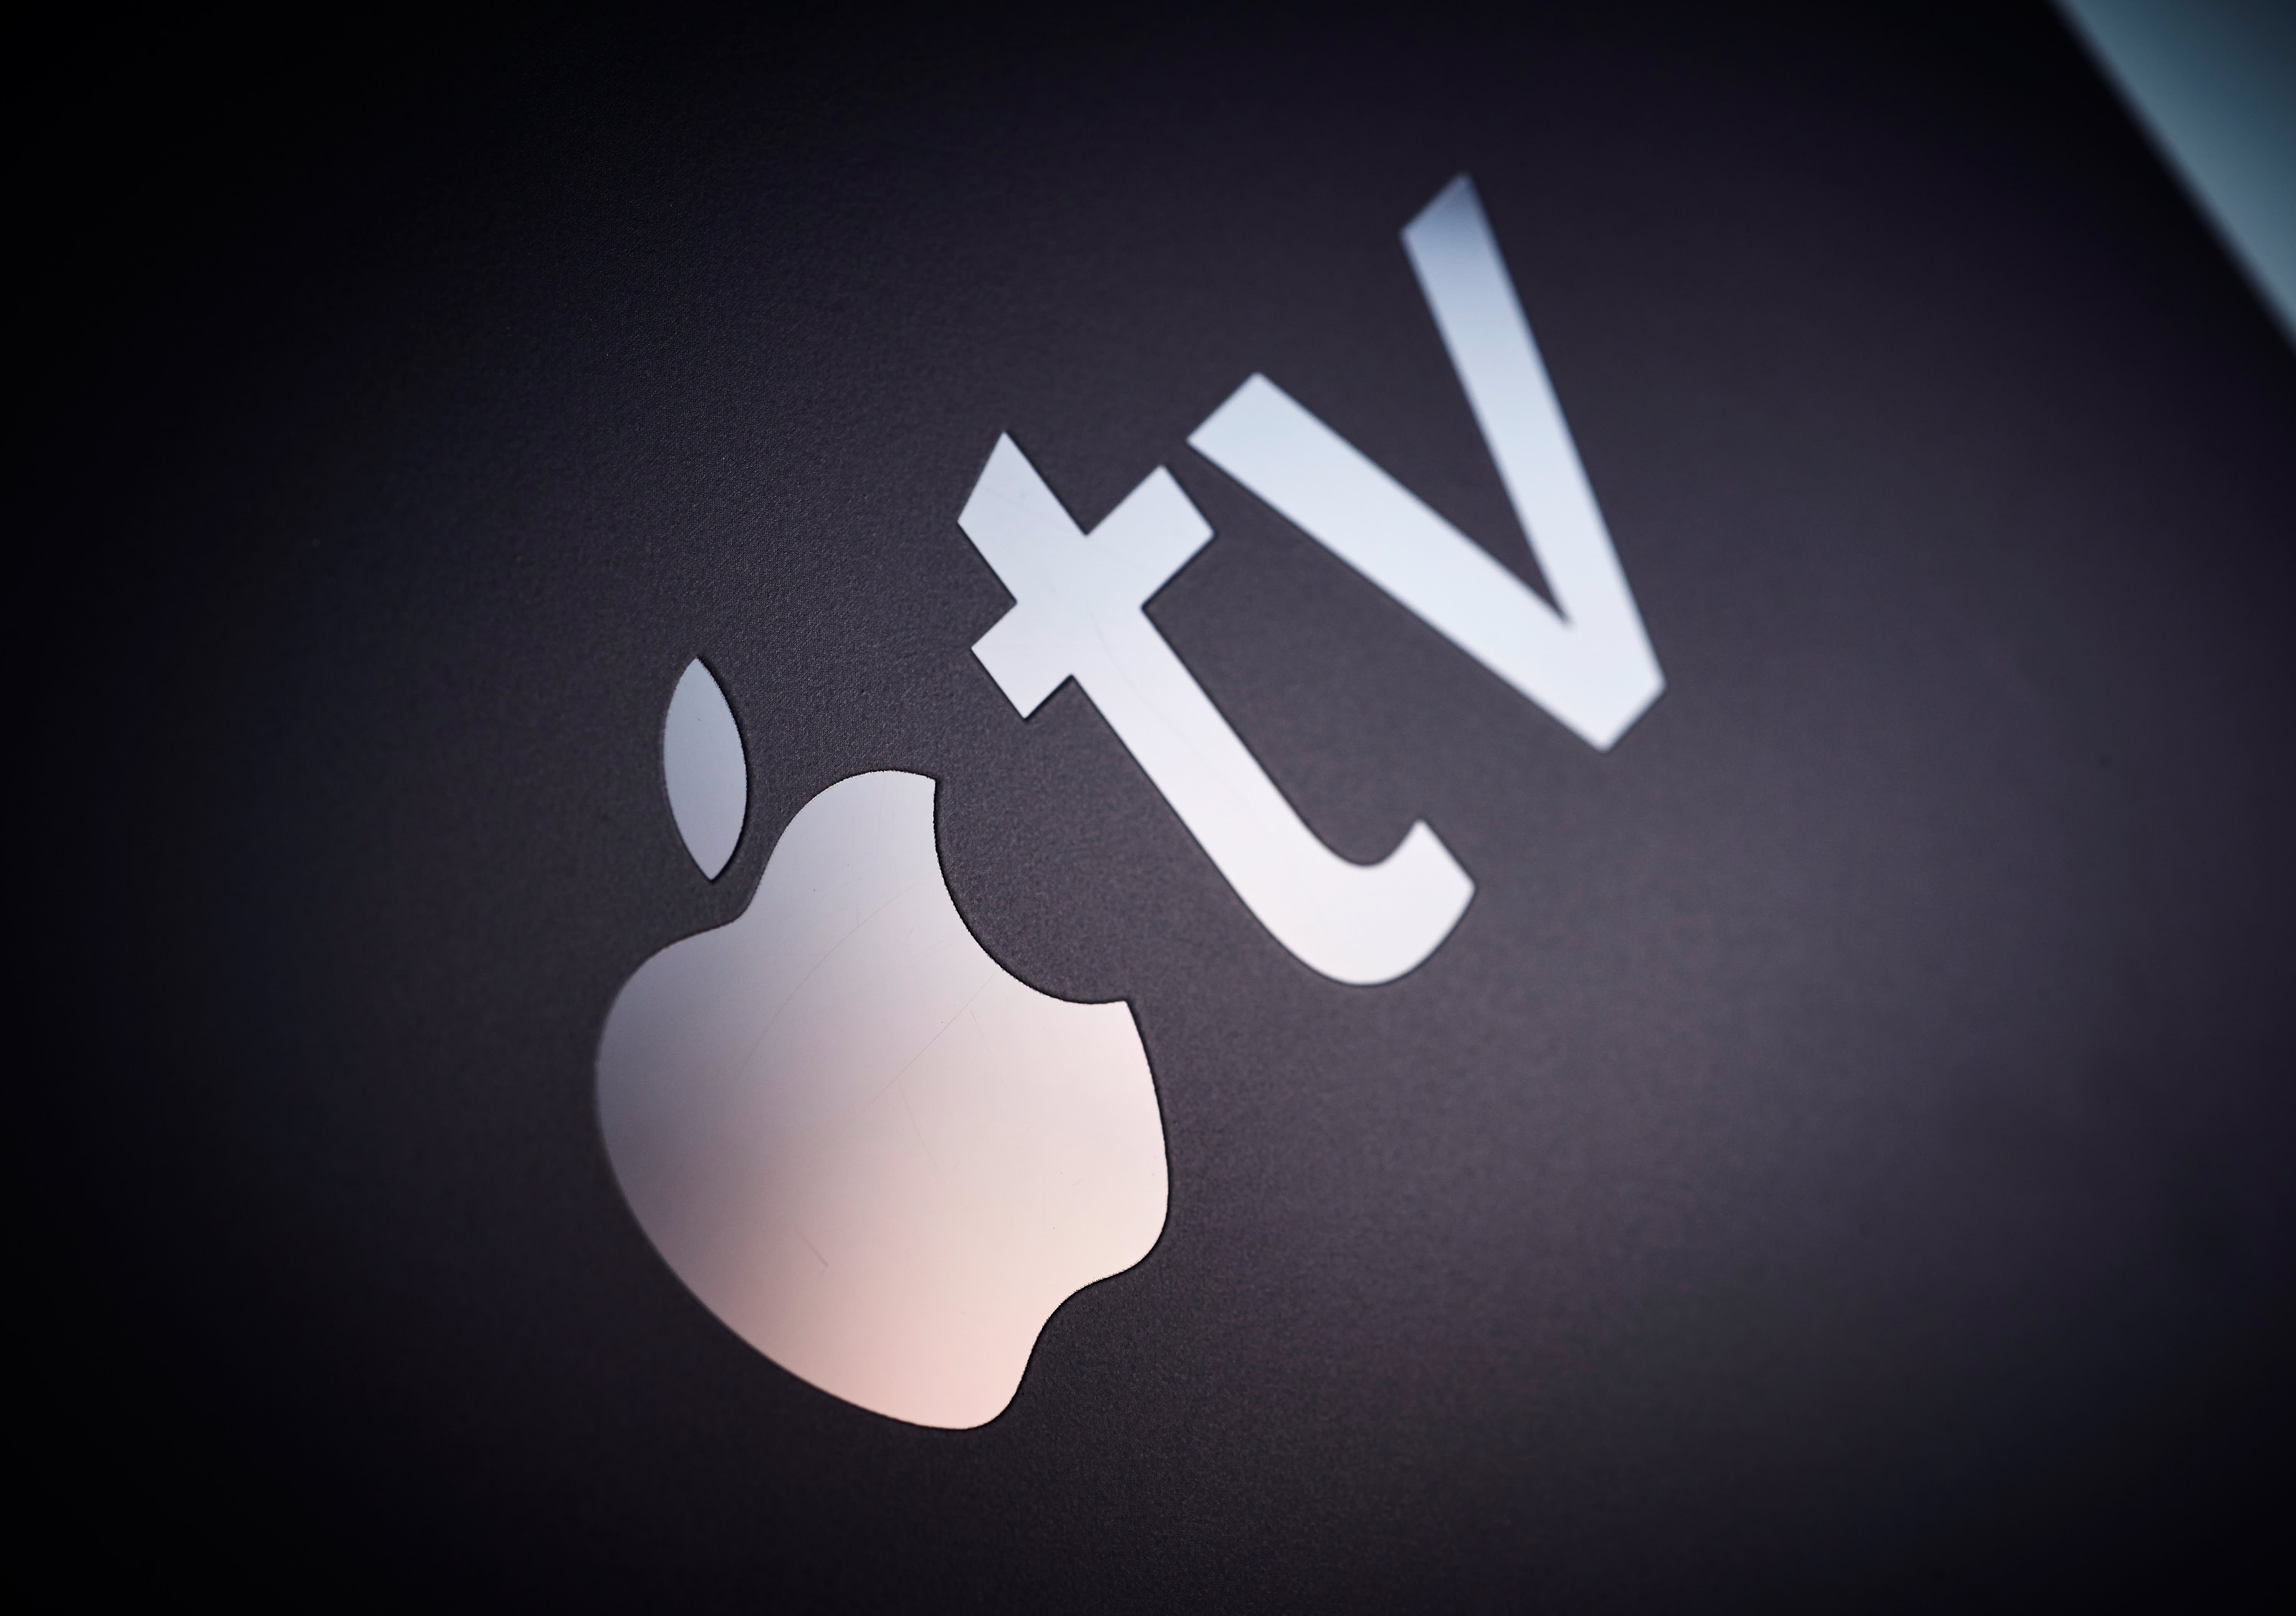 Apple TV+ is a natural evolution for the company, analyst says